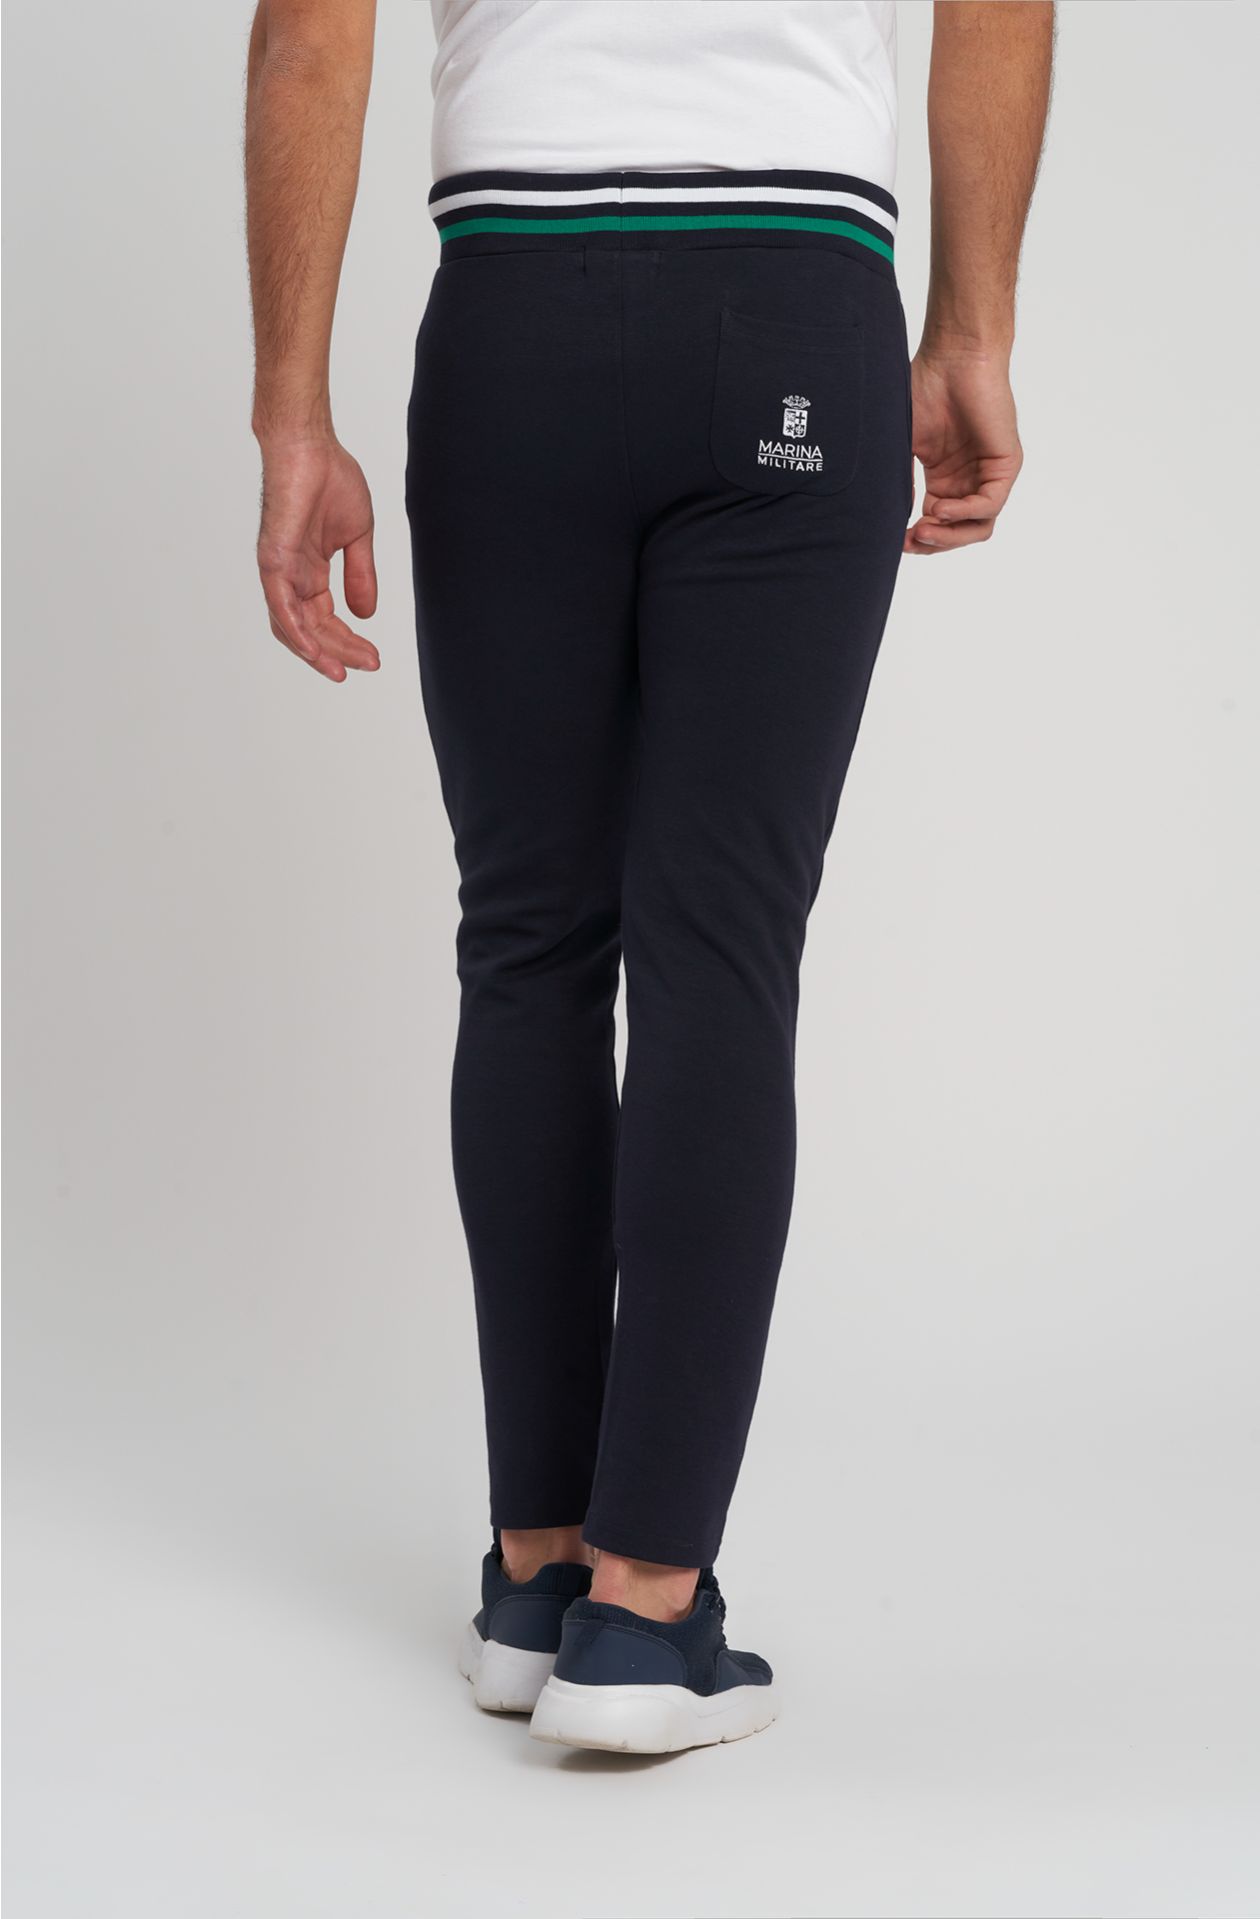 Country club line trousers